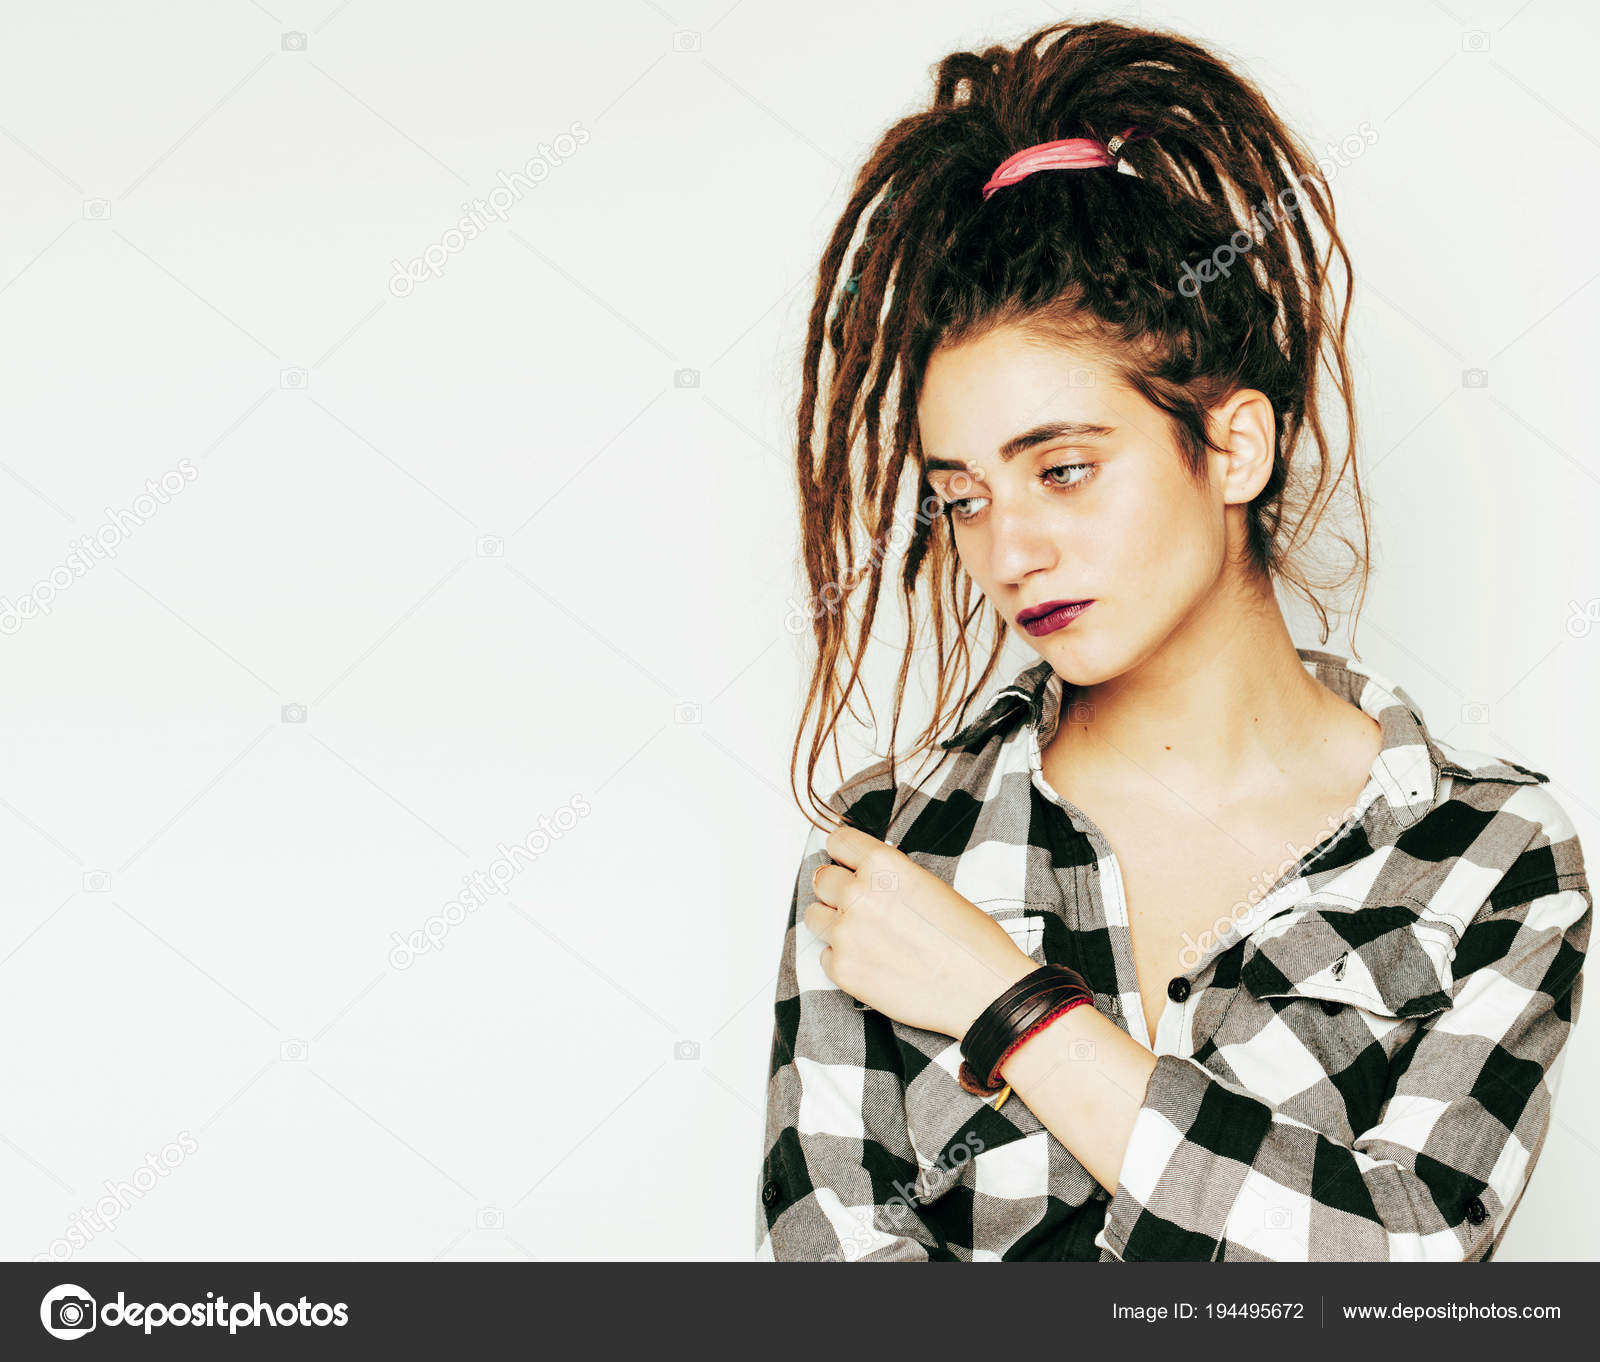 Real Caucasian Woman With Dreadlocks Hairstyle Funny